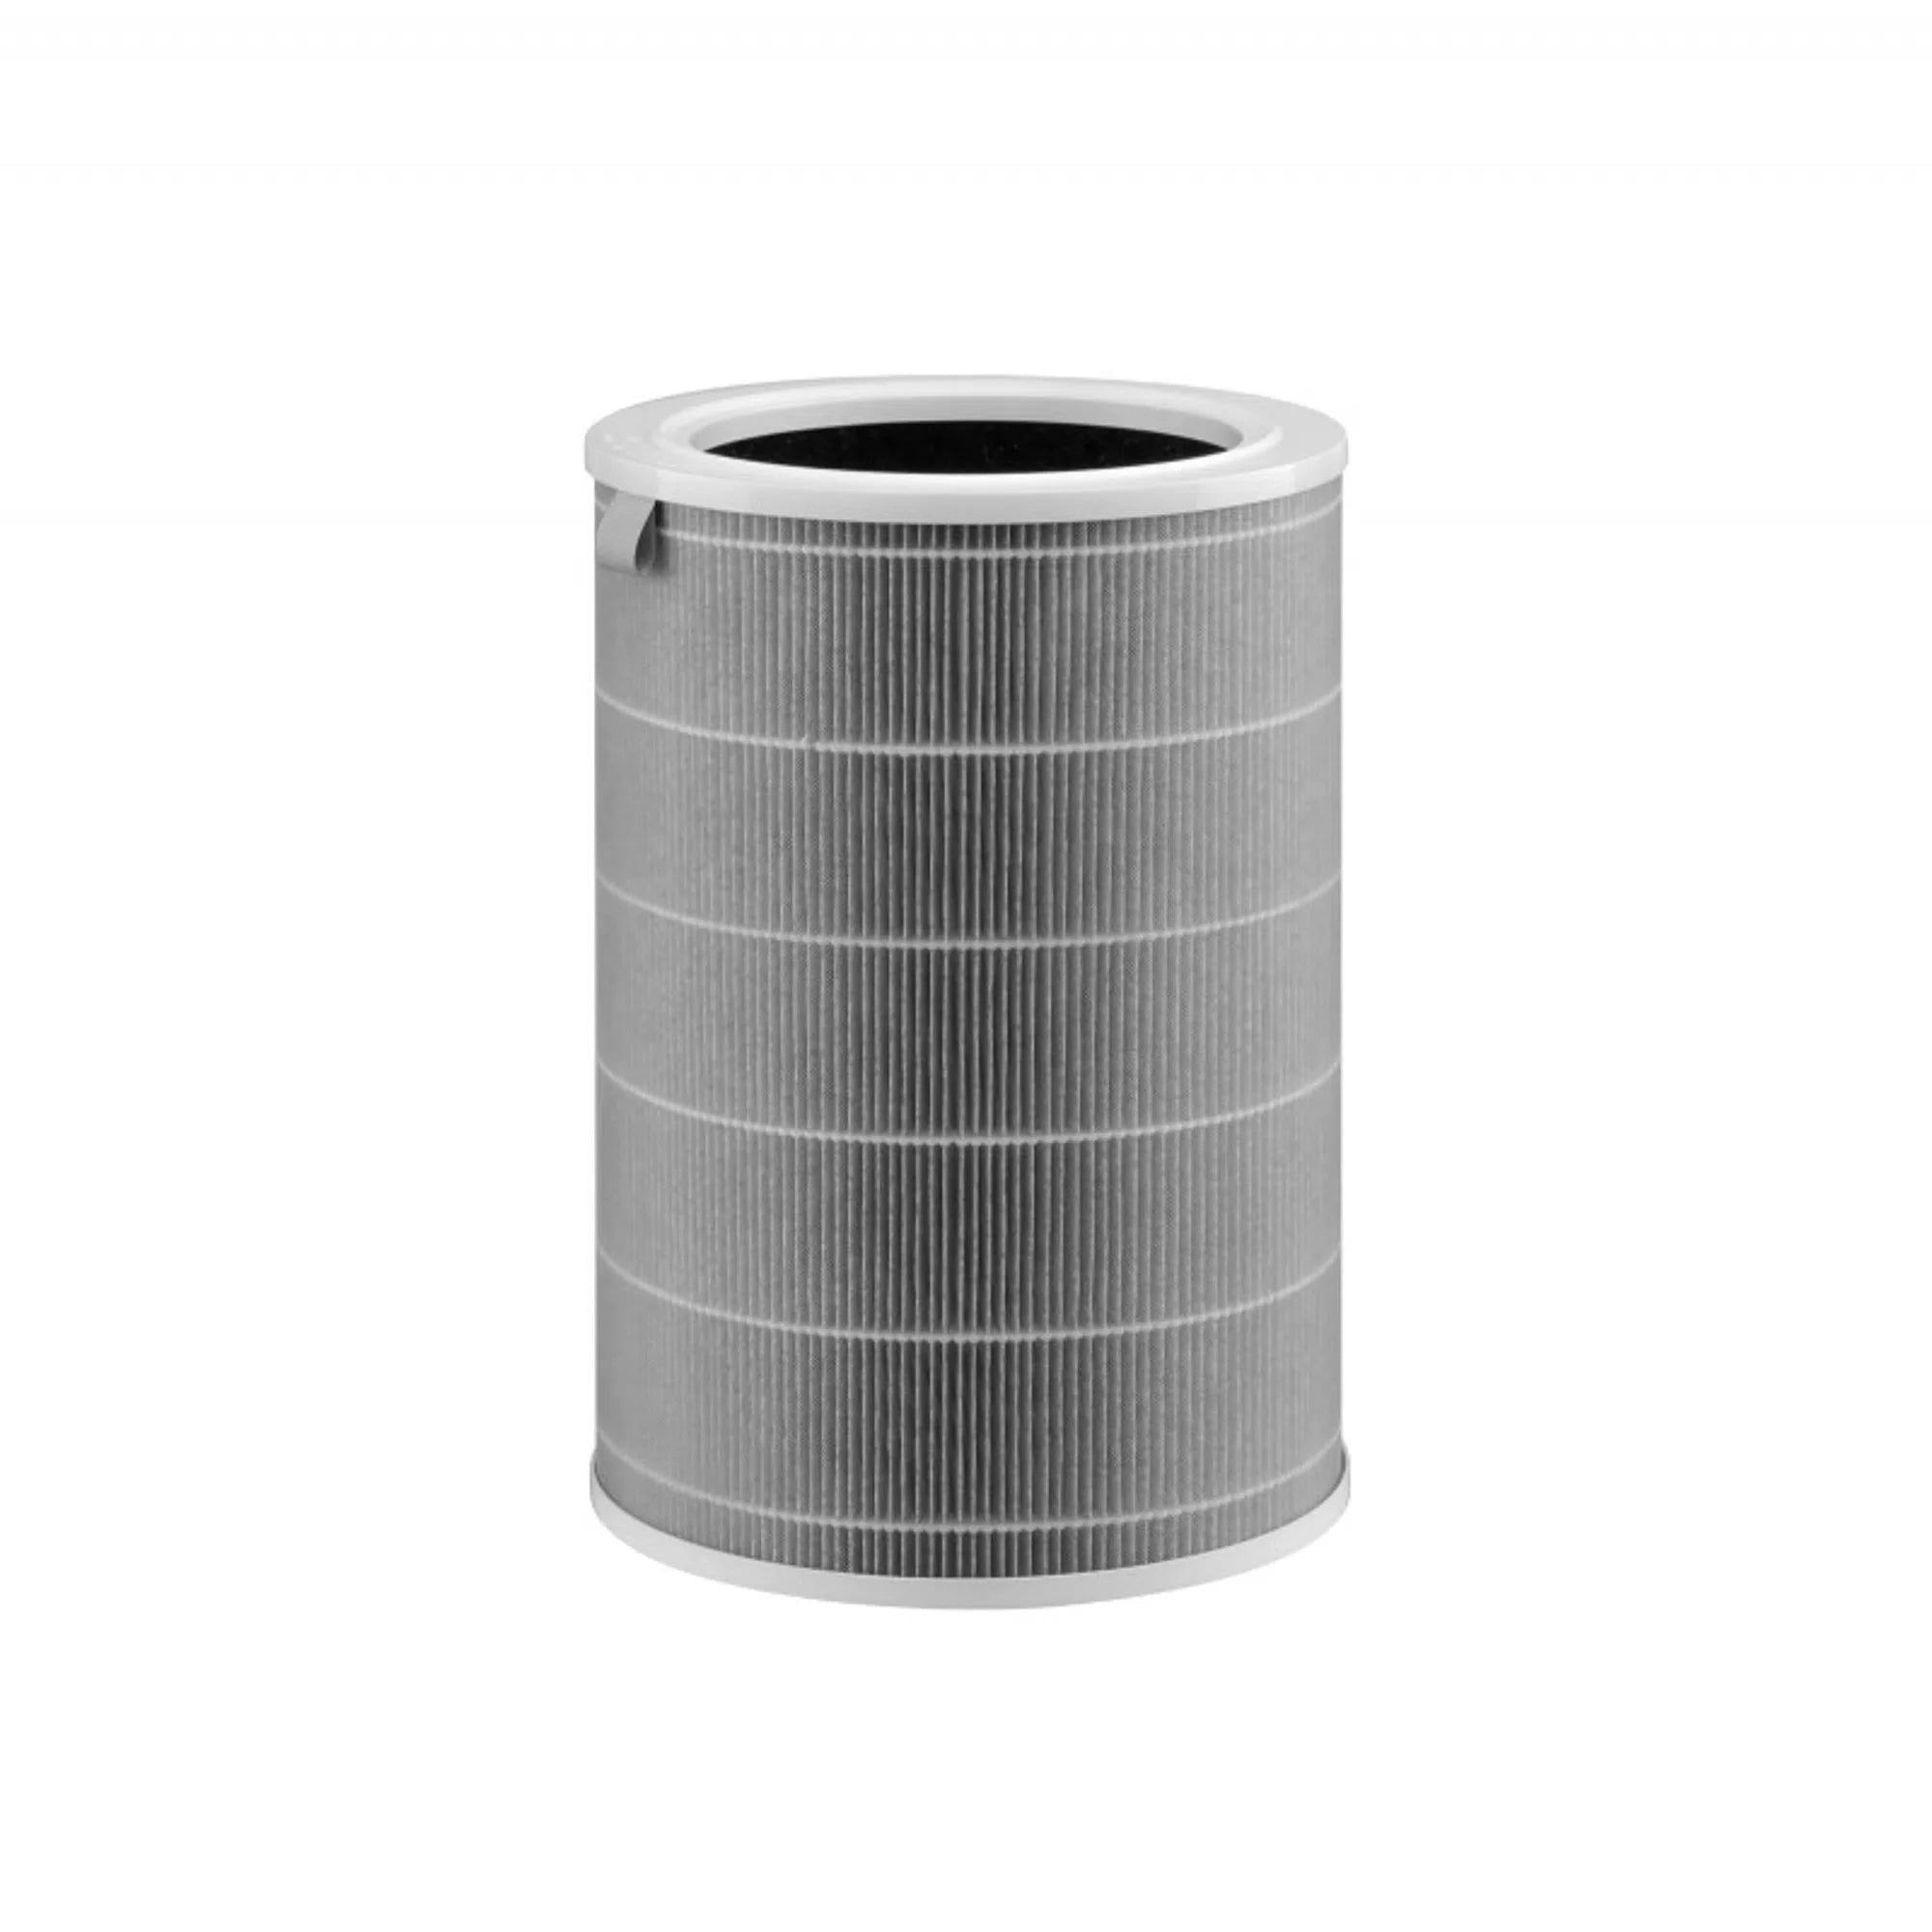 Mi Air Purifier HEPA Filter (Compatible with All Mi Air Purifiers) - Black